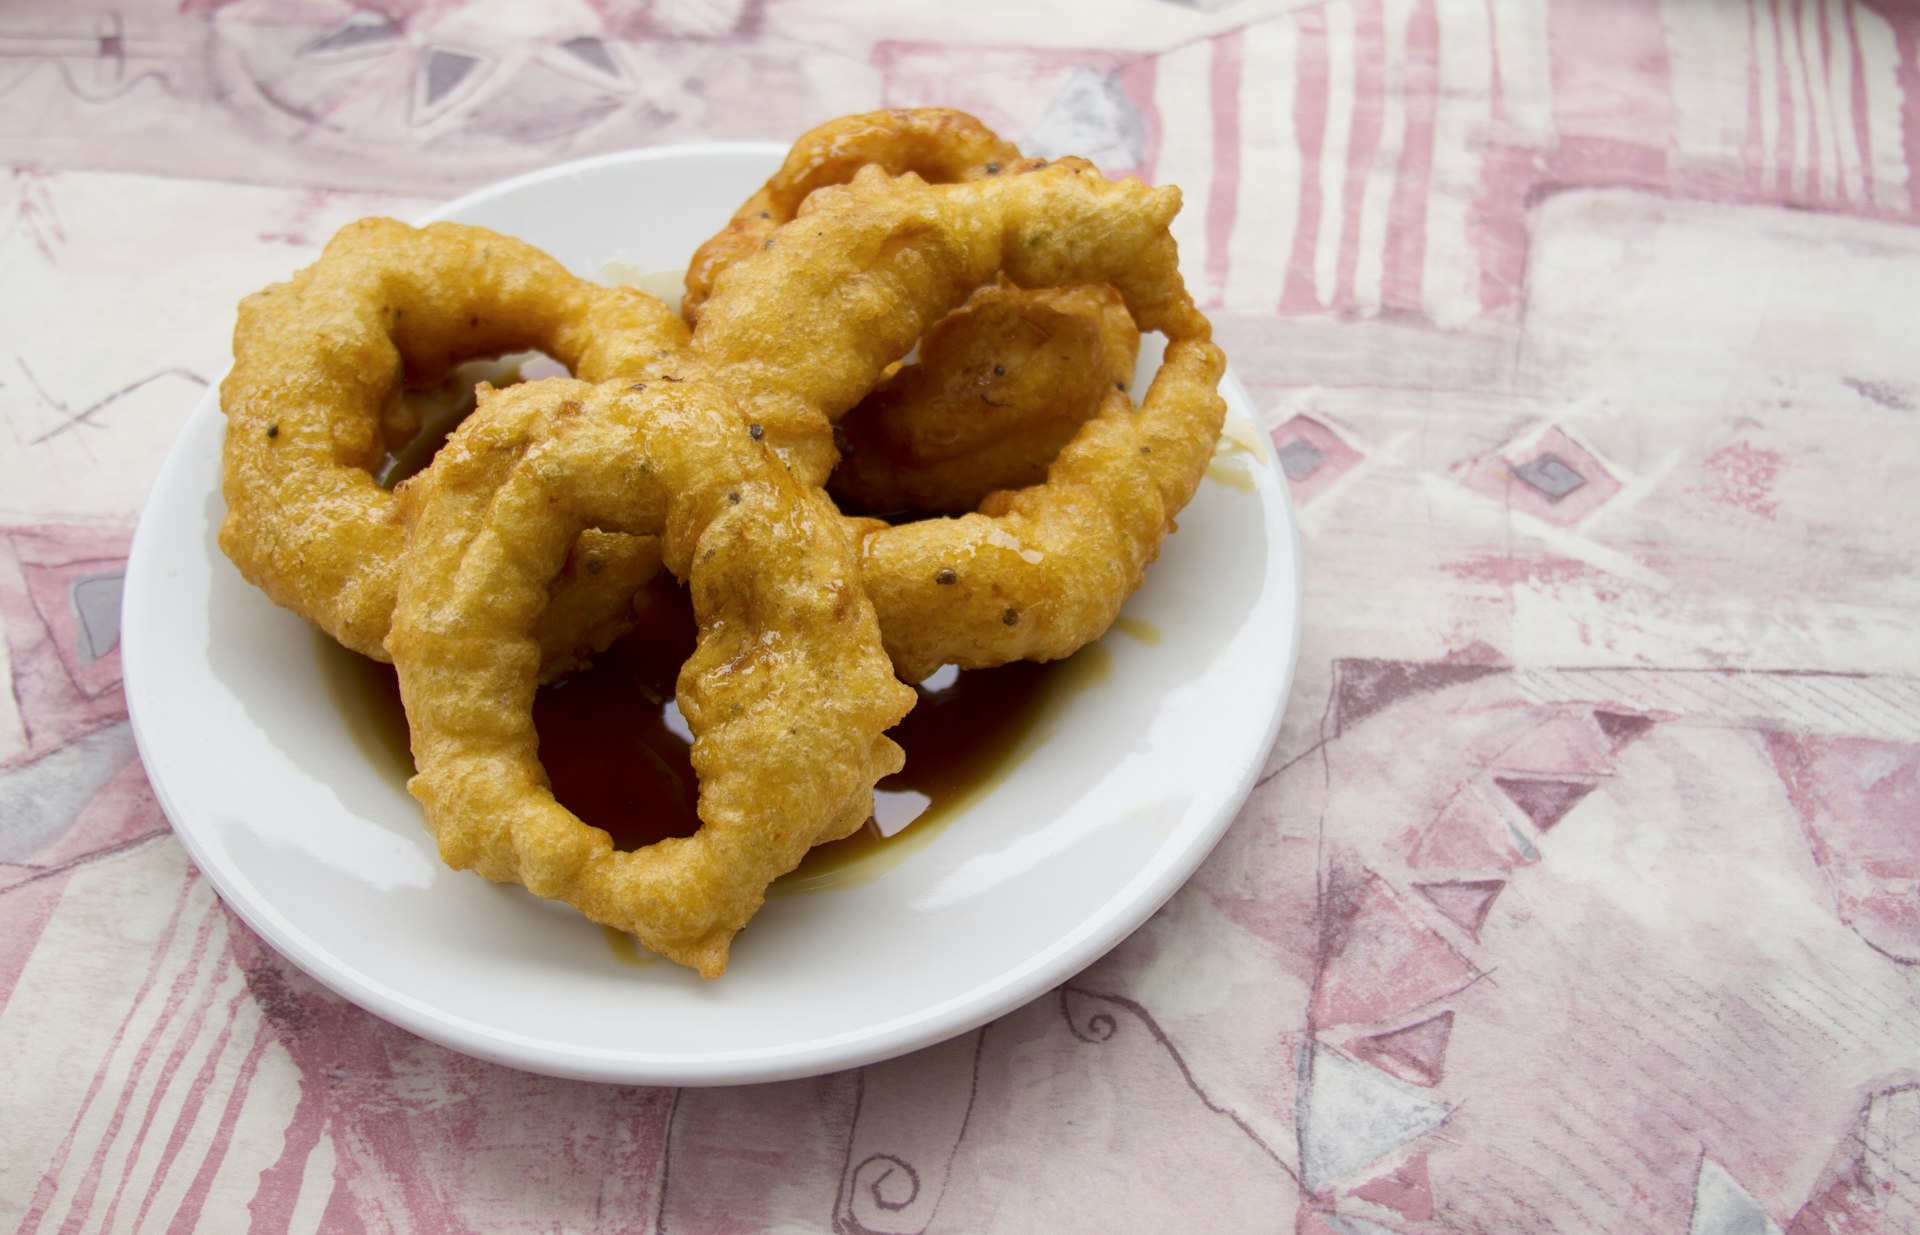 A plate of Peruvian dessert speciality of picarones